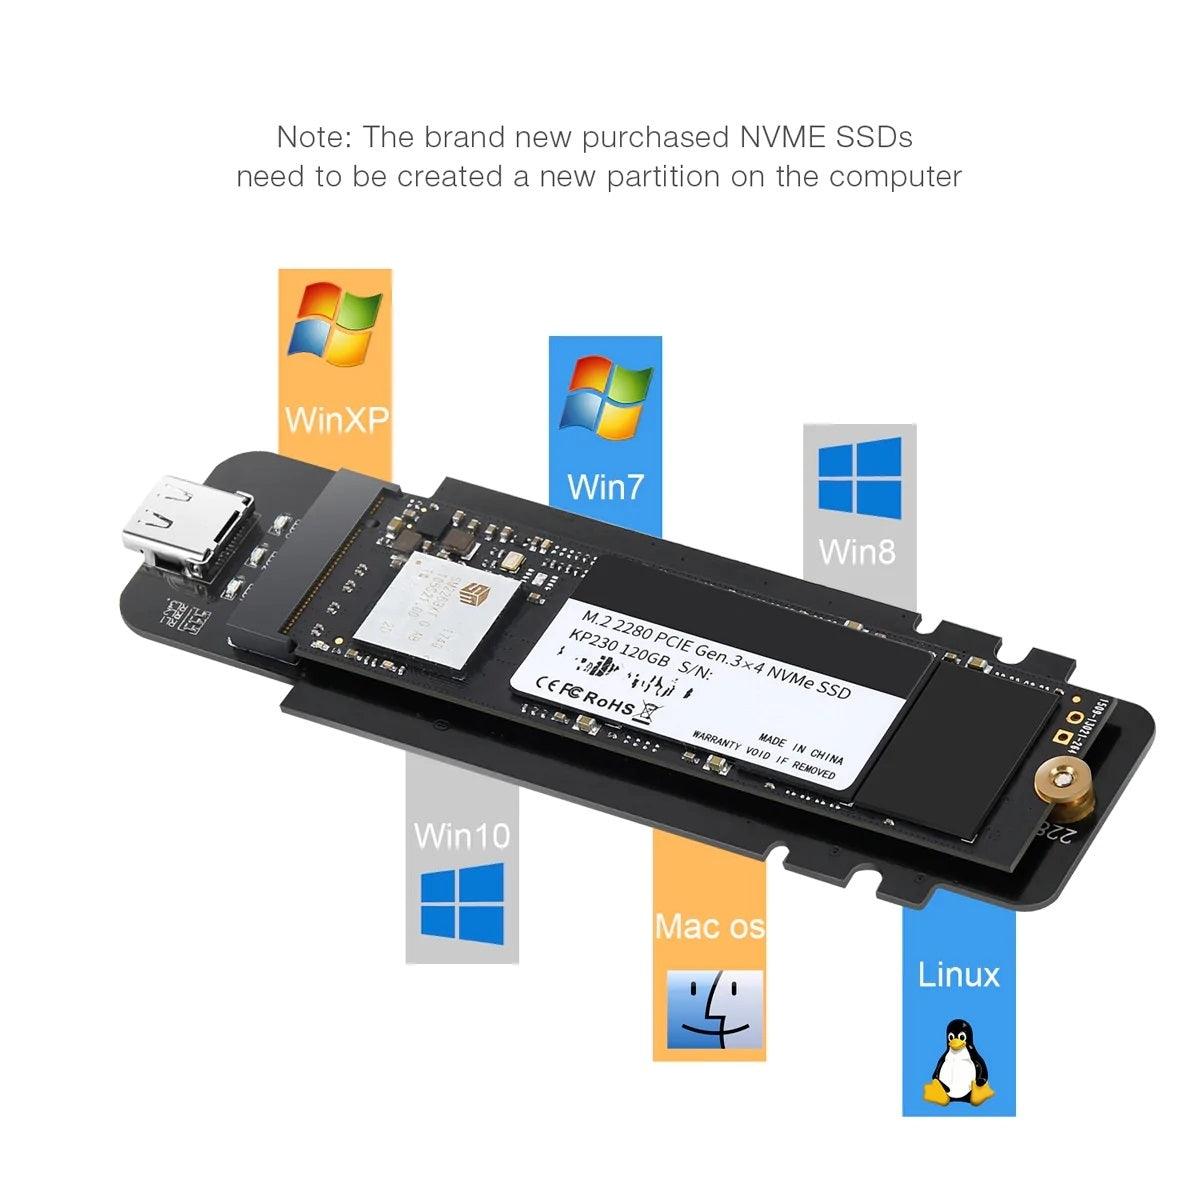 CHOETECH PC-HDE02 M.2 to USB SSD Reader (Enclosure only) Supports M-Key (PCI-E NVMe-based)